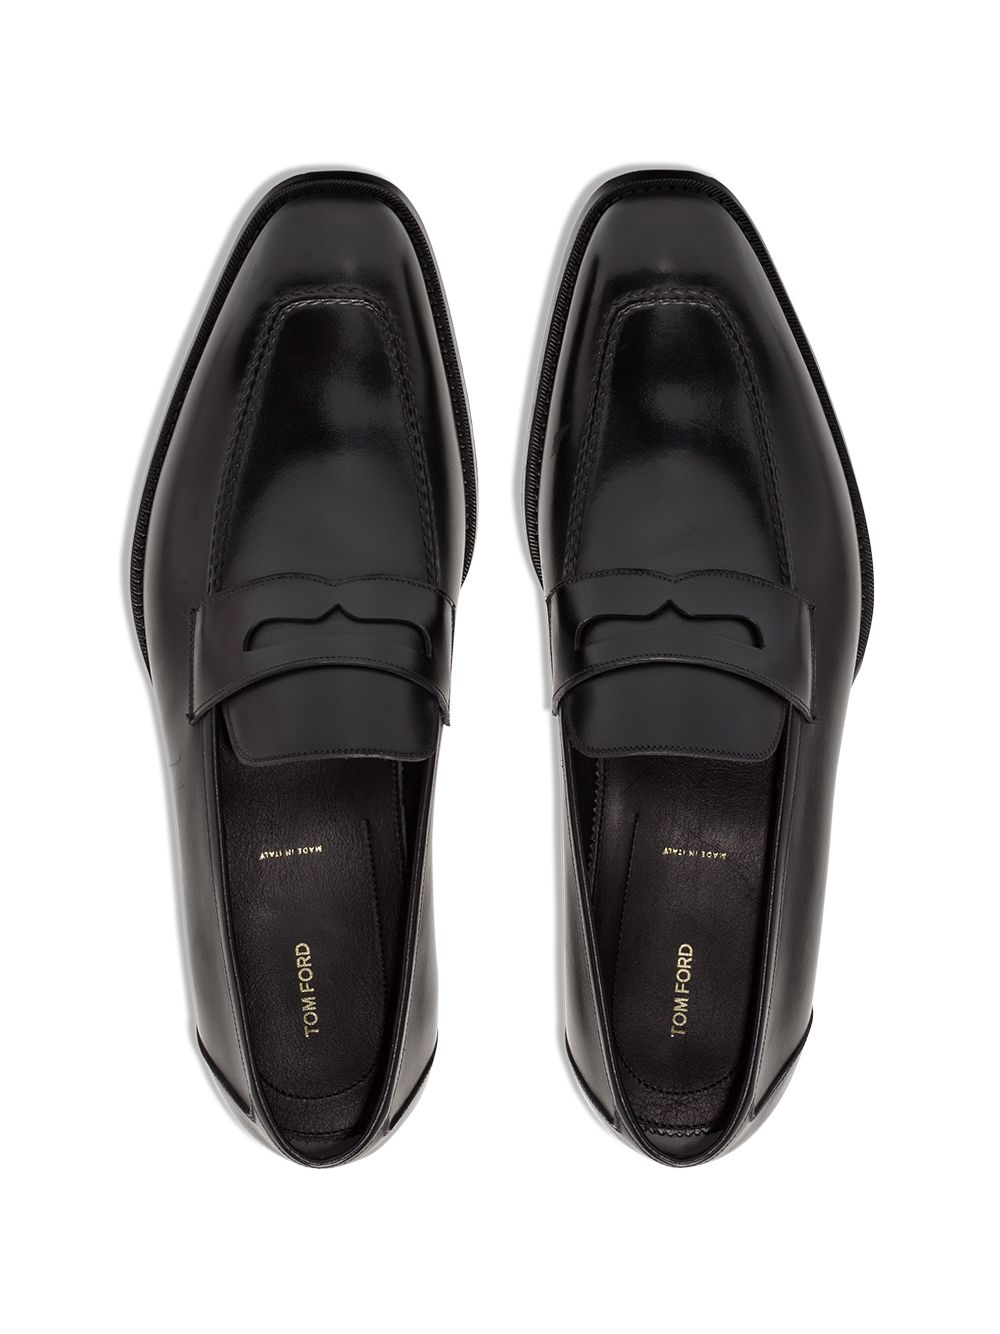 TOM FORD Wessex Penny Loafers - Farfetch